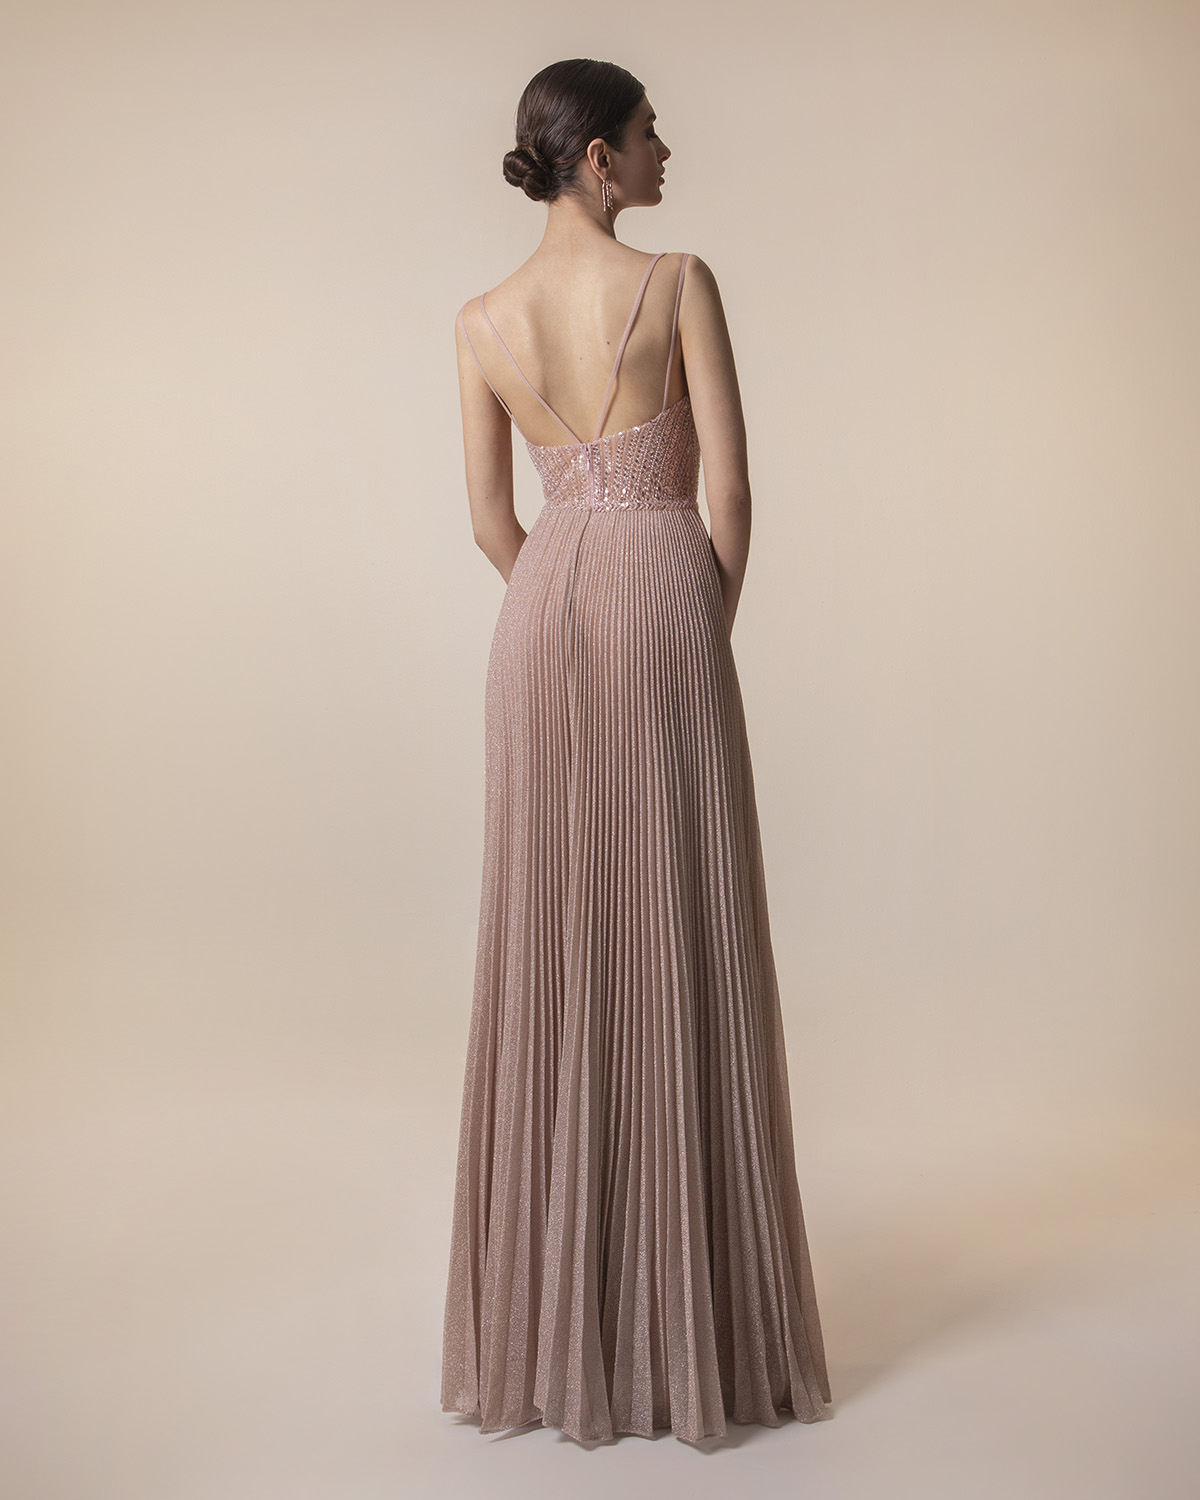 Long pleated evening dress with shining fabric and fully beaded top